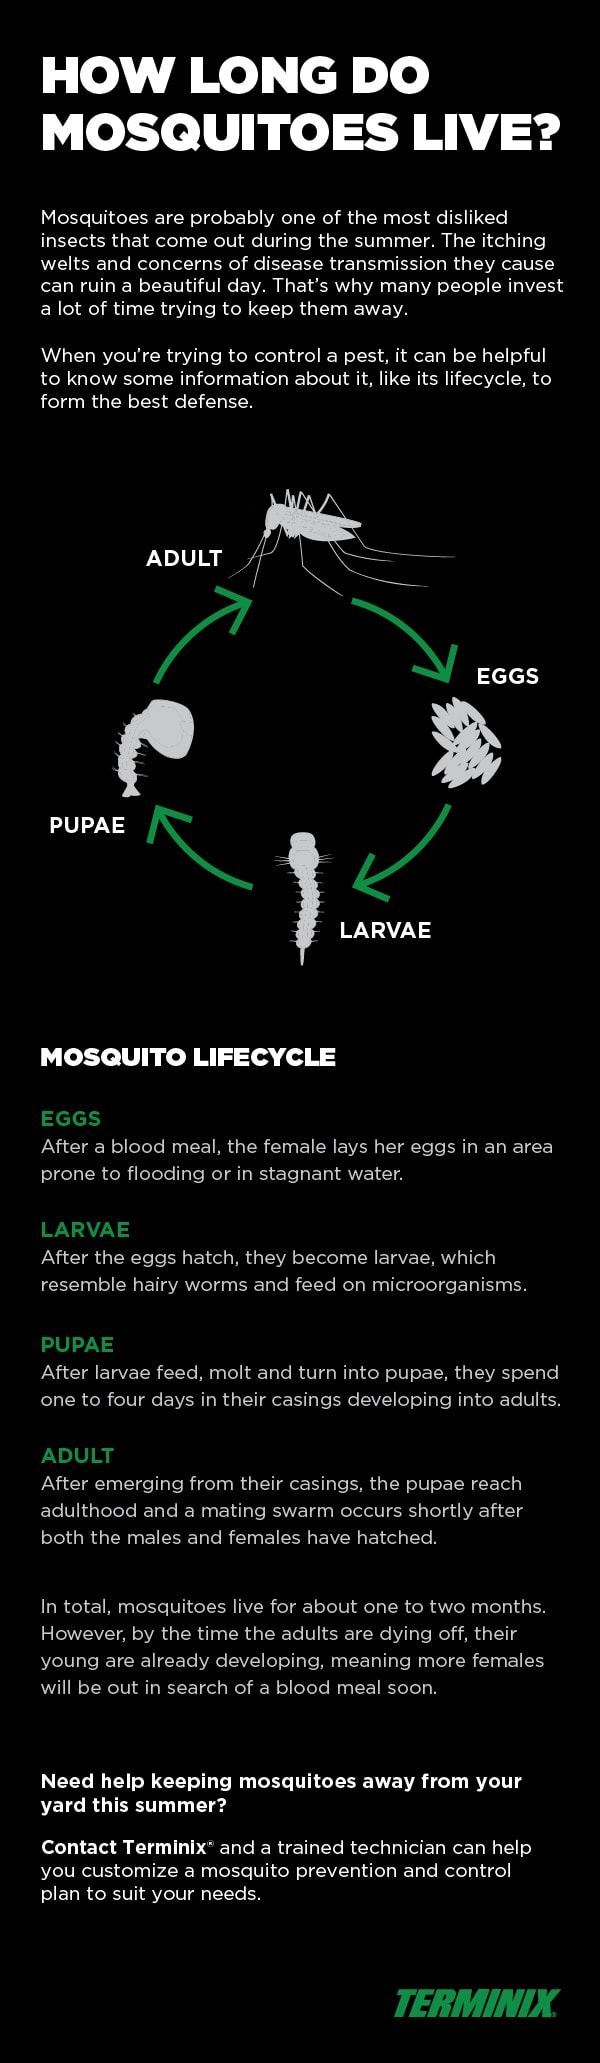 how long do mosquitoes live